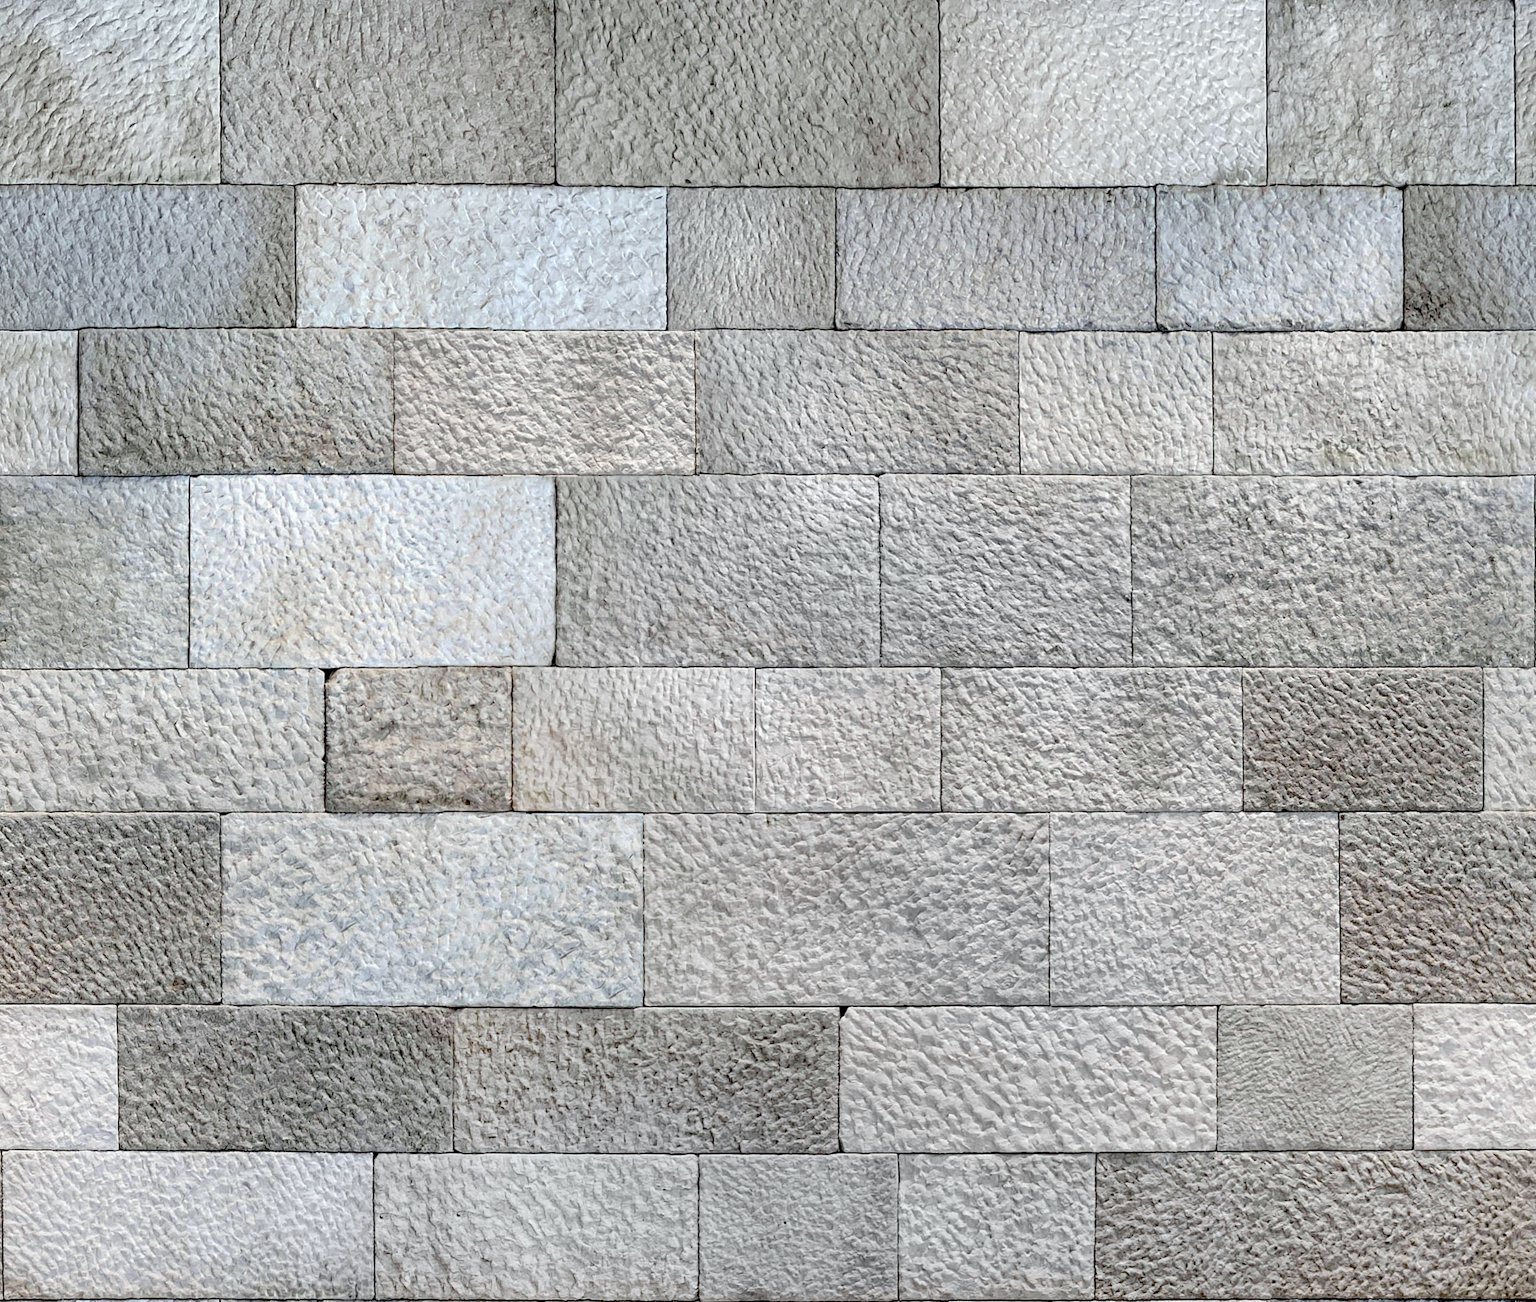 Broma_walling_ECO OUTDOOR_texture